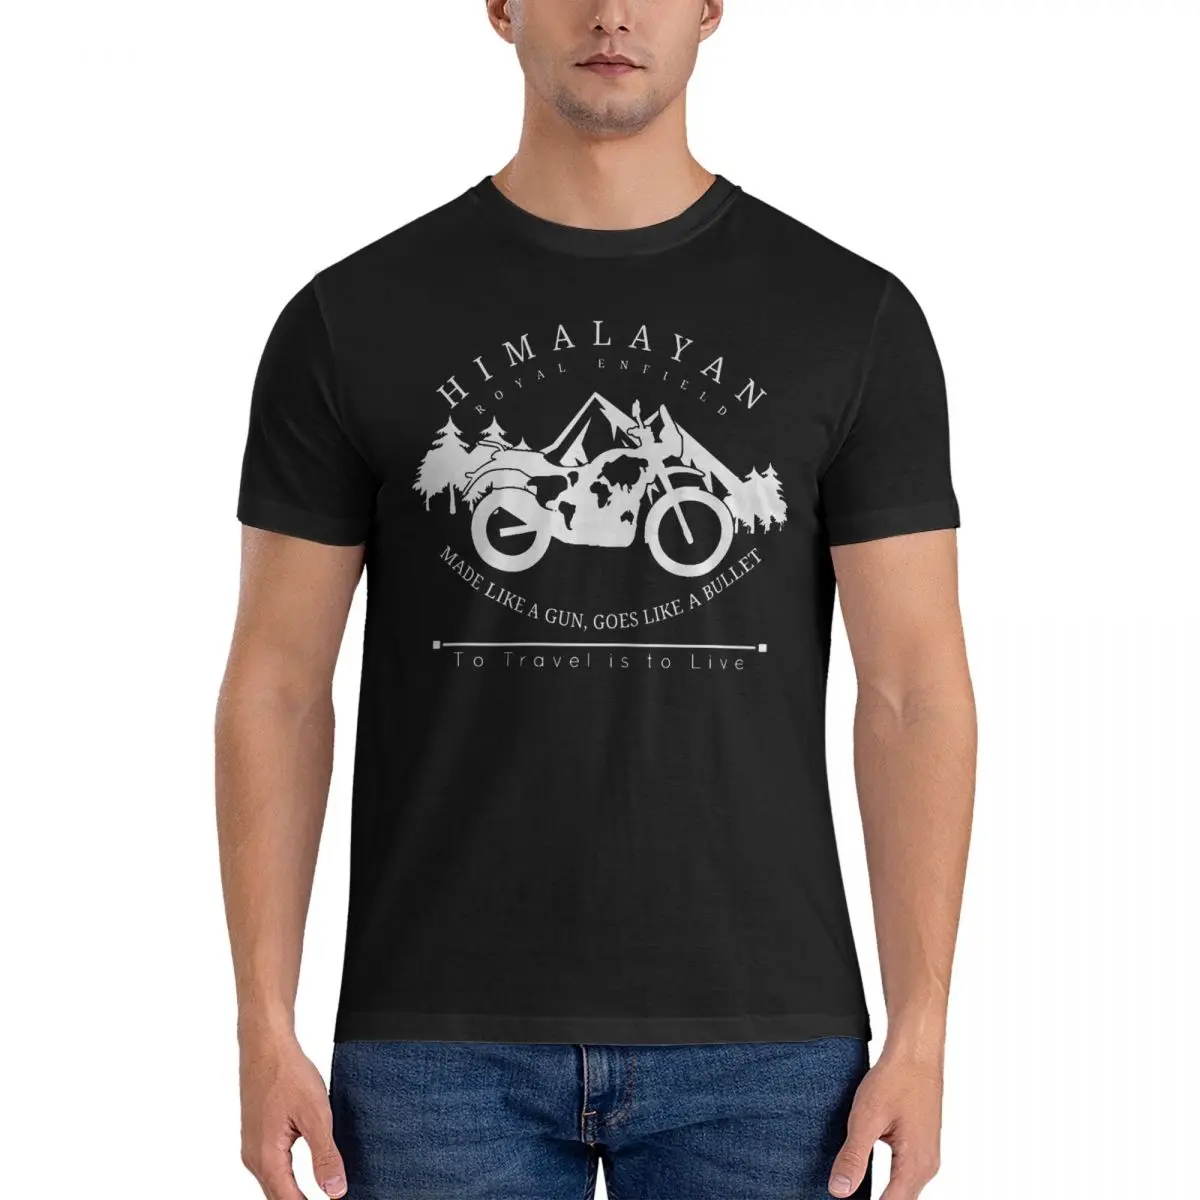 

HIMALAYAN Designs By FASHION THERAPY Men's T Shirt R-Royal Enfield Cool Tee Shirt Short Sleeve Crewneck T-Shirts Cotton Graphic